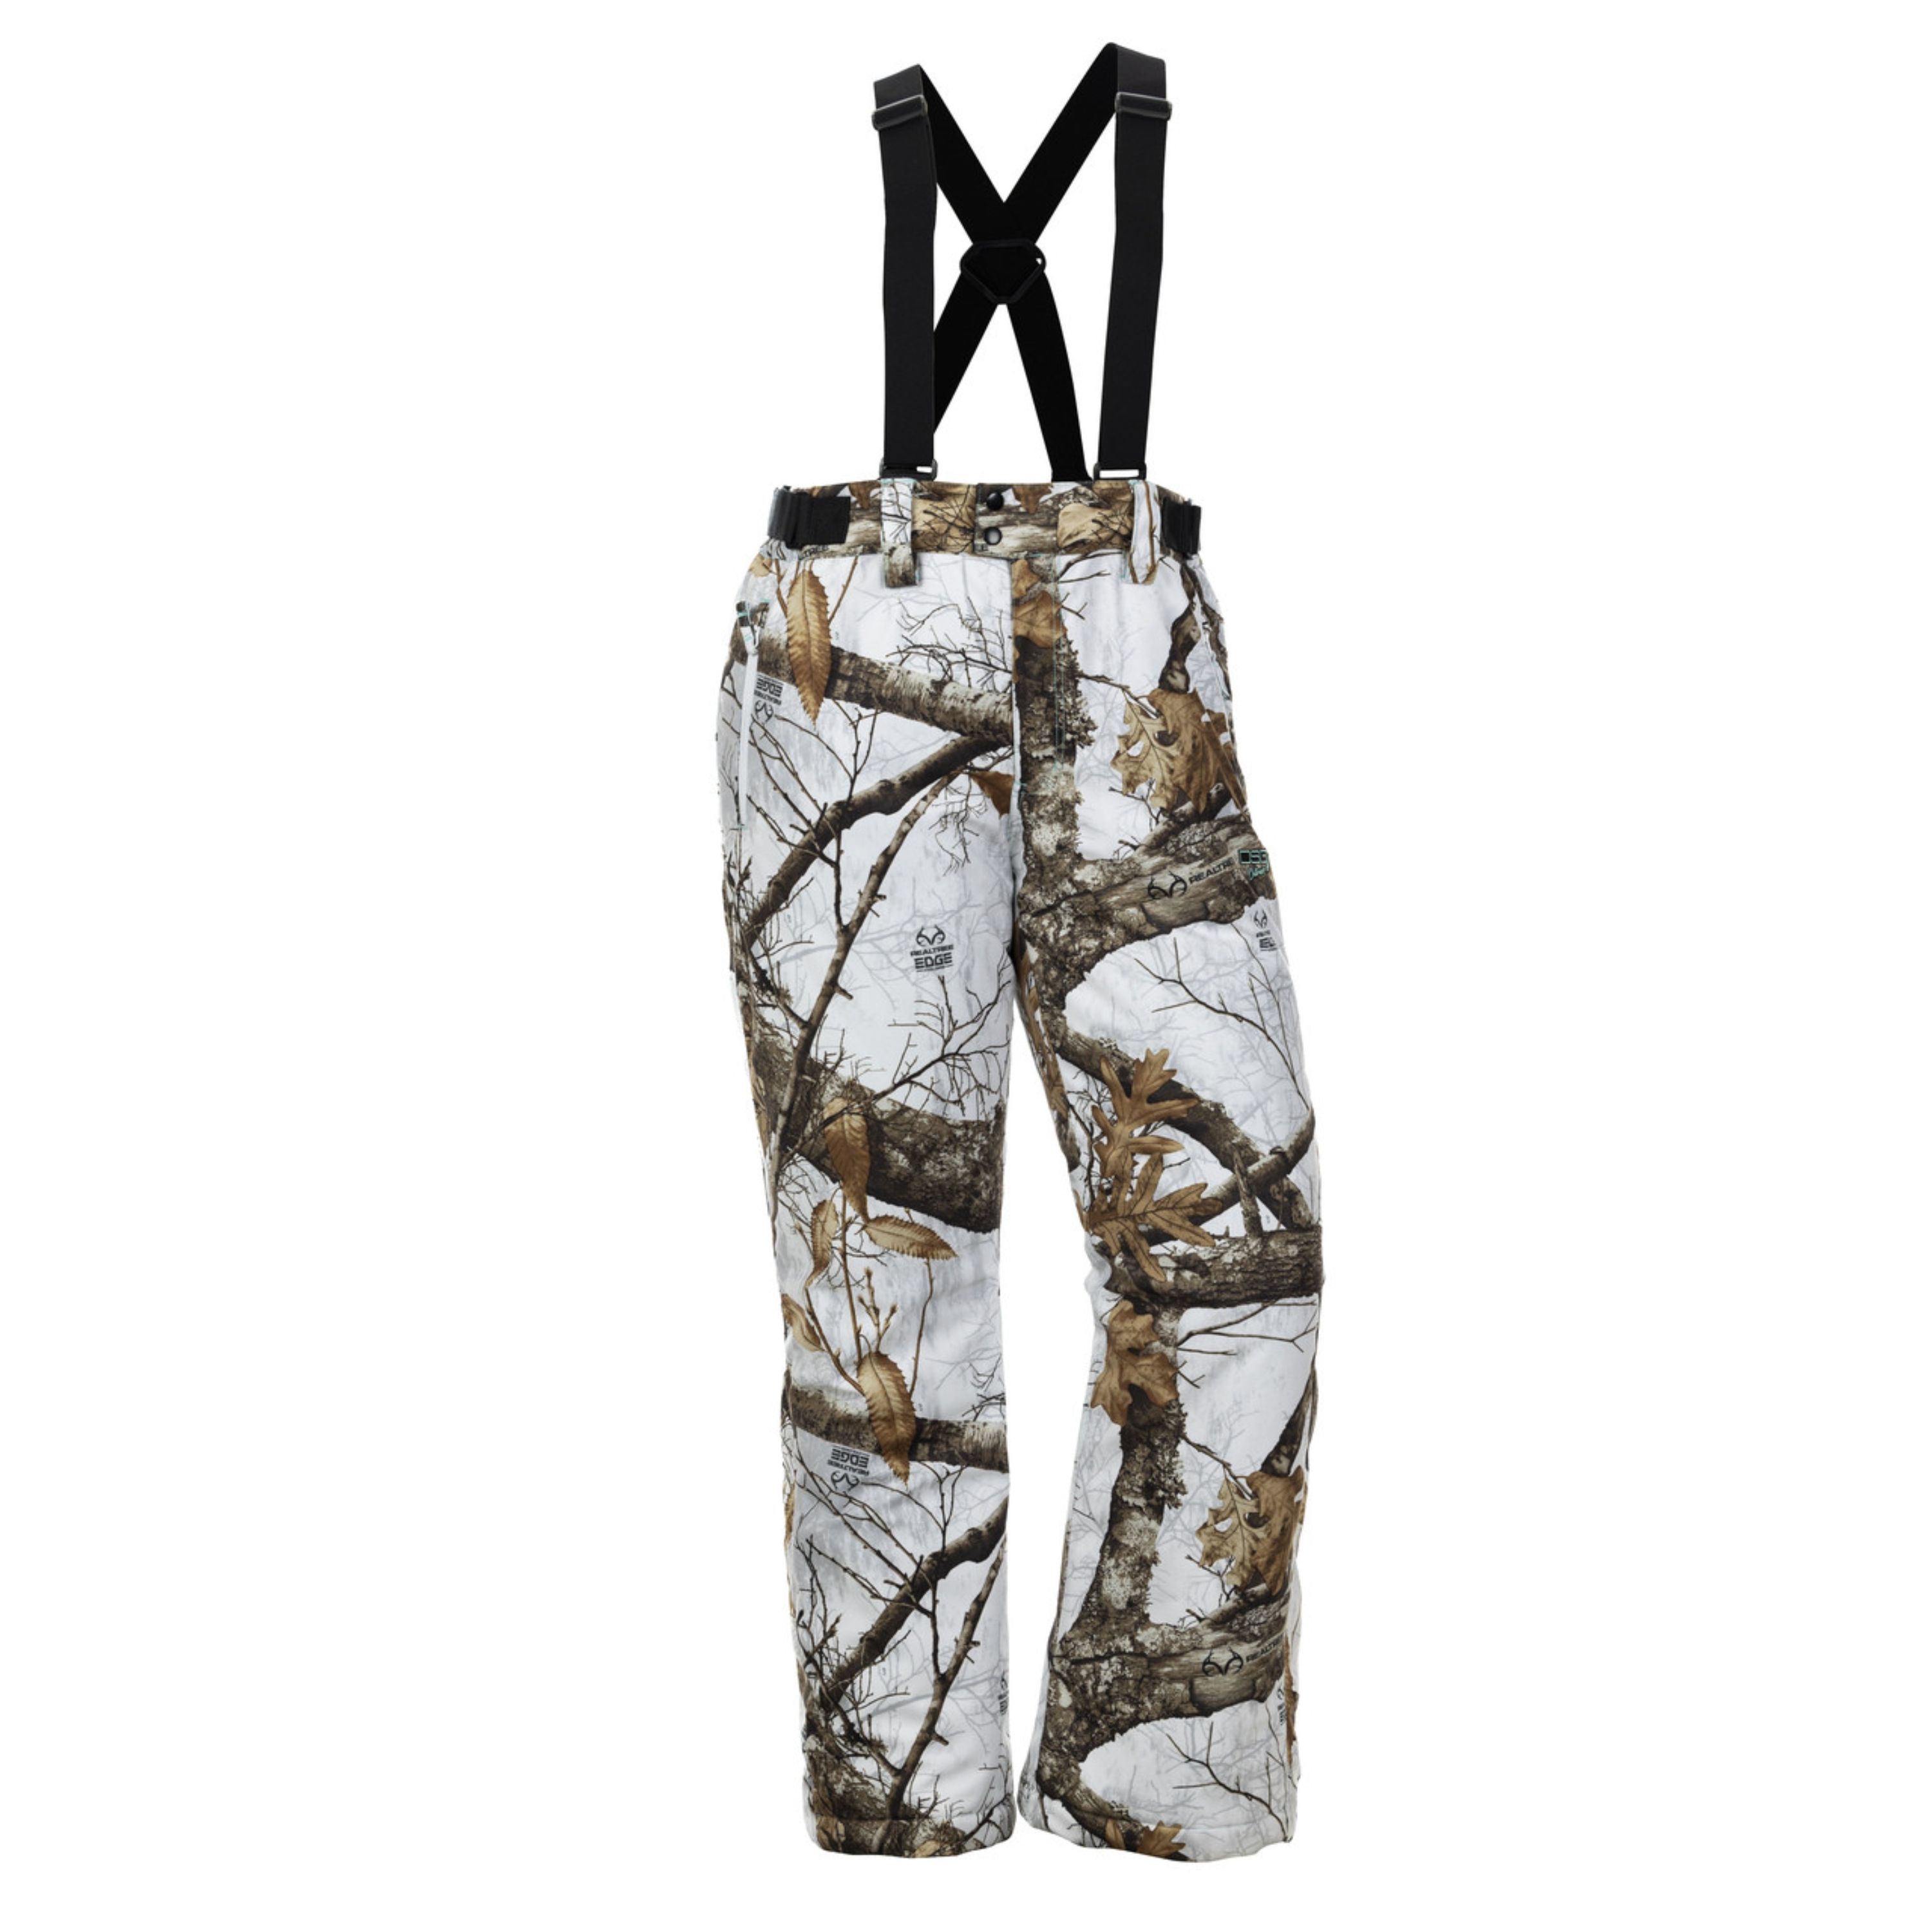 Camo Hunting Pants w/ Suspenders | DSG Outerwear